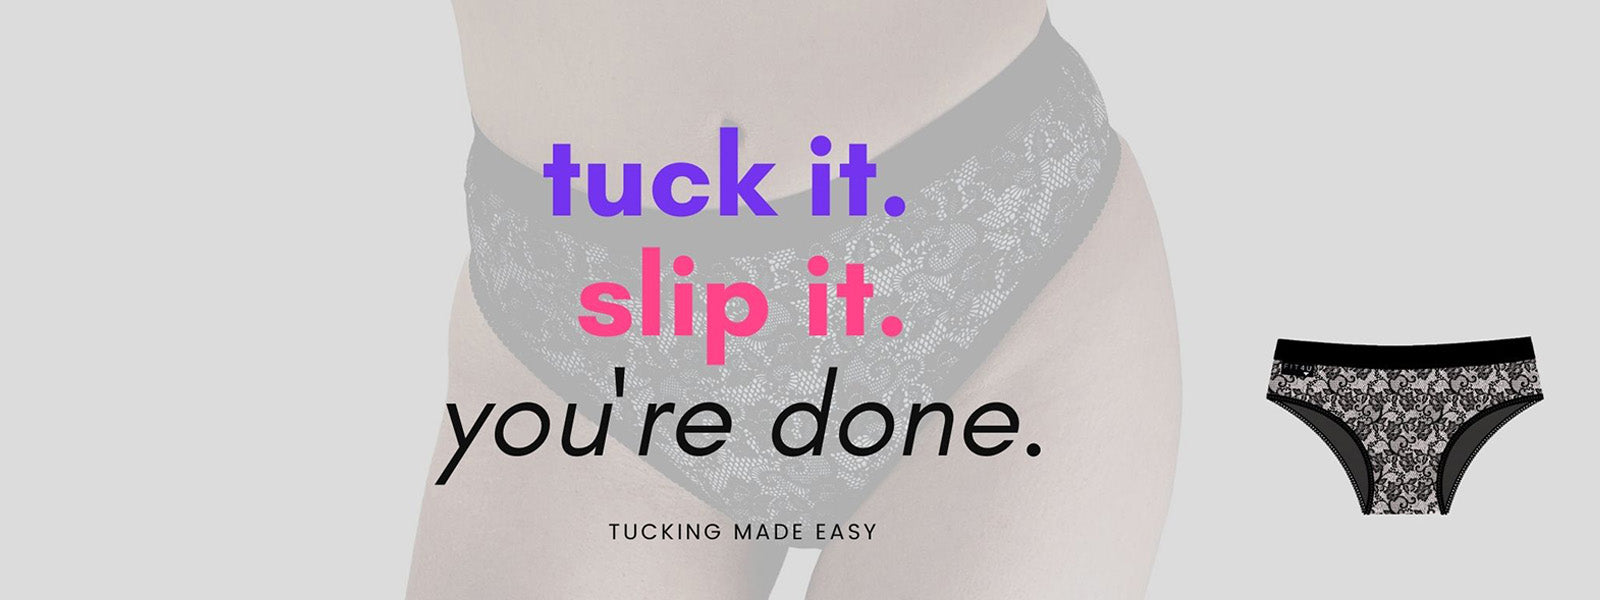 Tucking, made easy. Tuck it. Slip it. You're